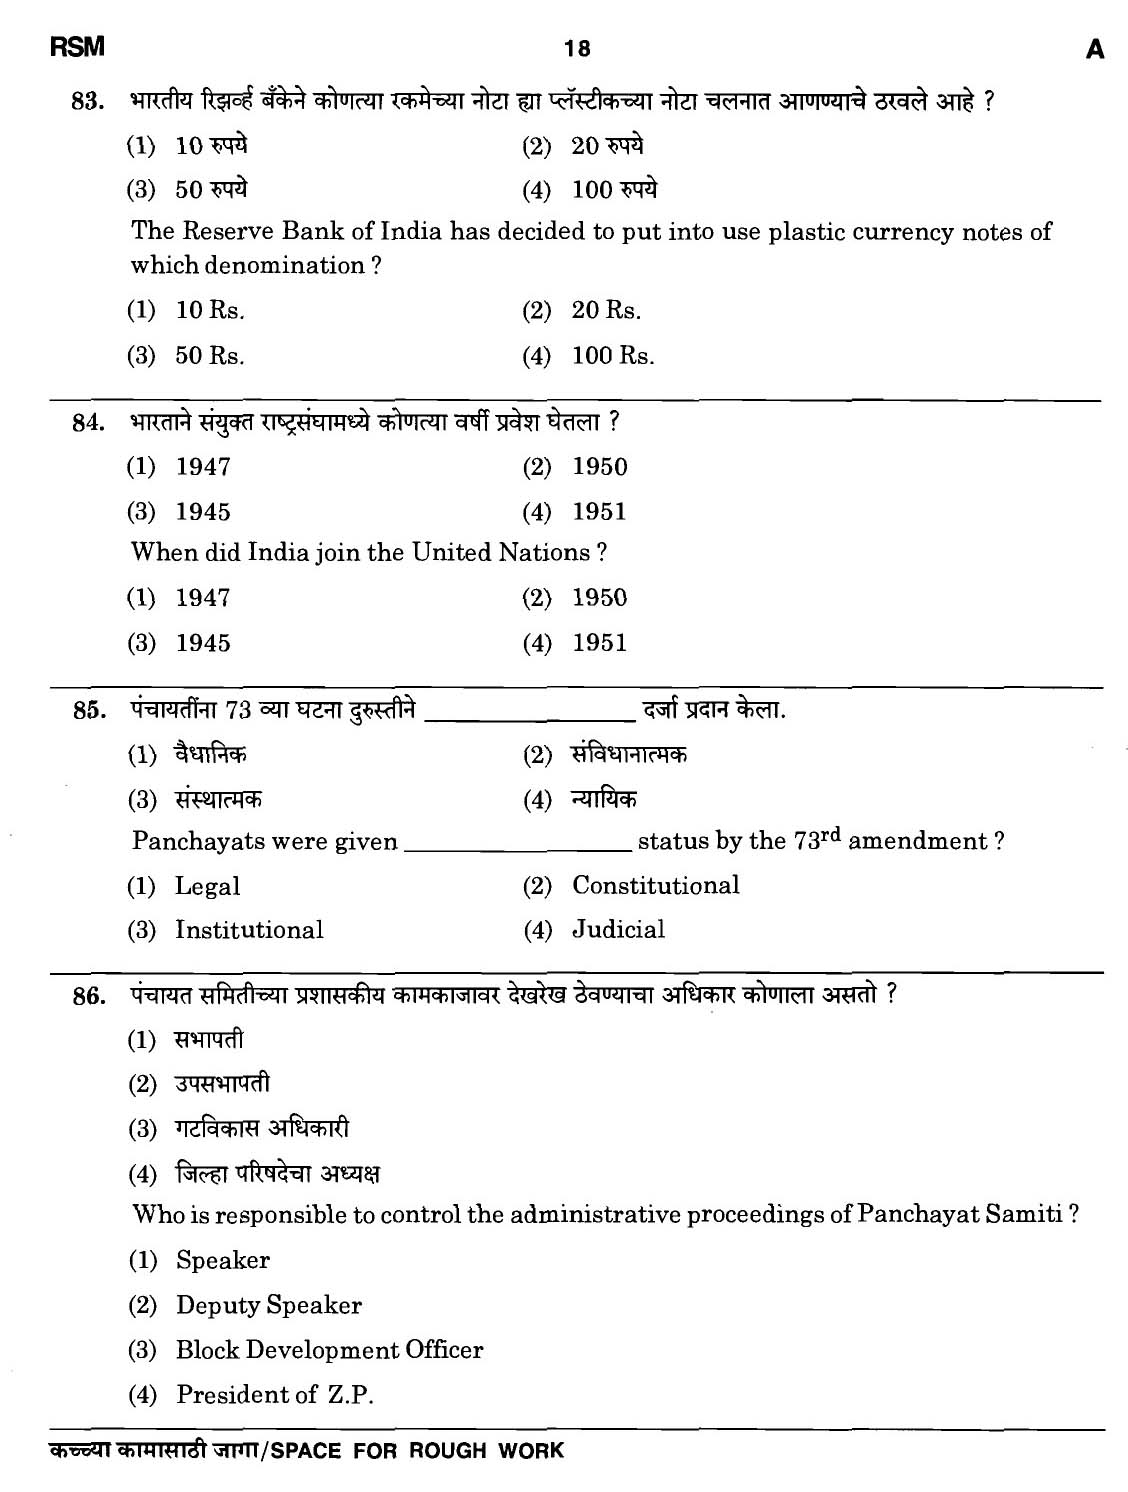 MPSC Agricultural Services Preliminary Exam 2011 Question Paper 17